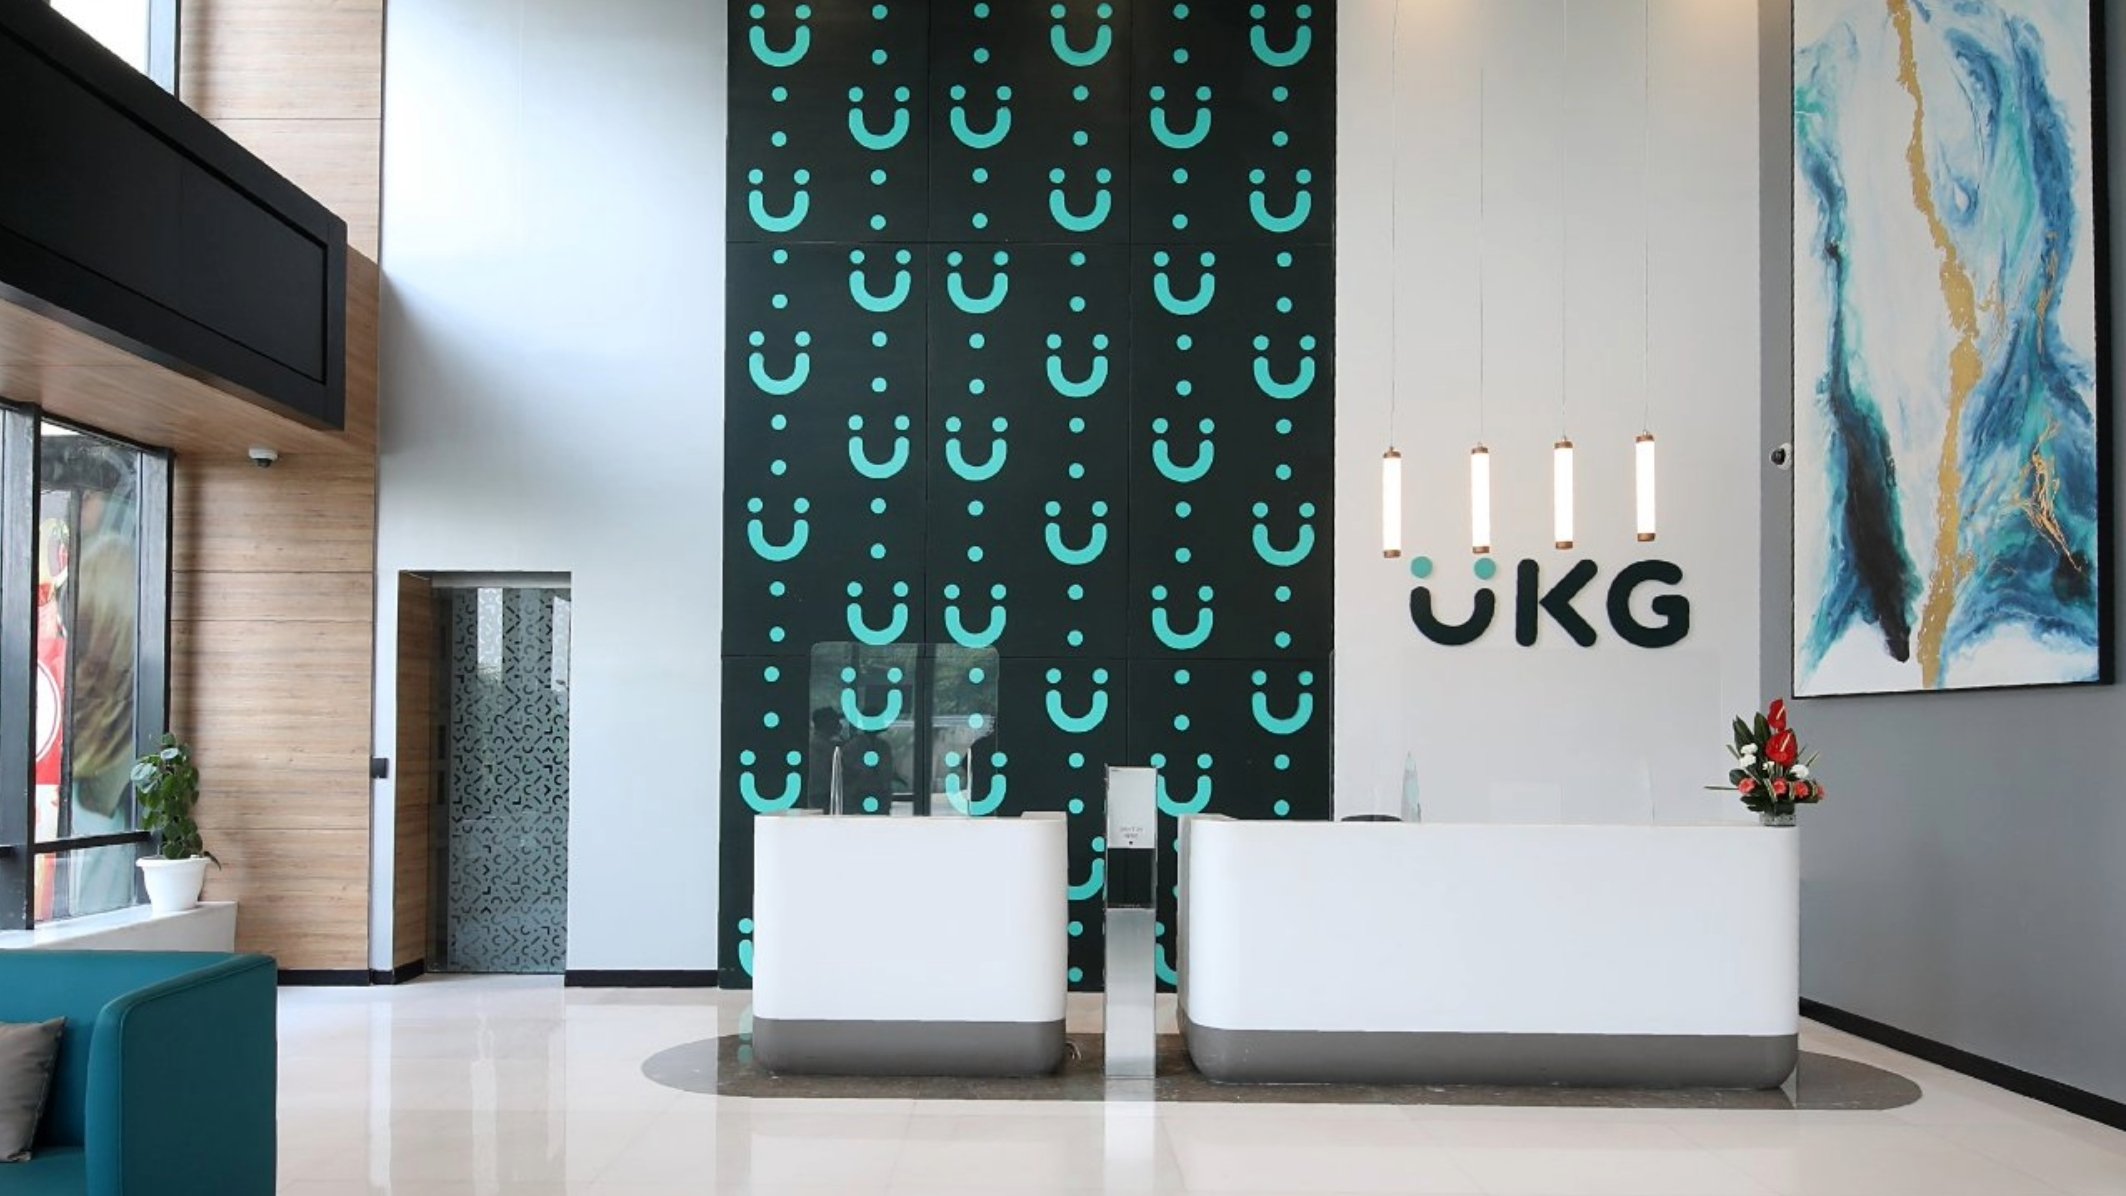 Front reception desk of UKG Building. Two white welcome areas with the UKG logo splashed on the wall behind them. 